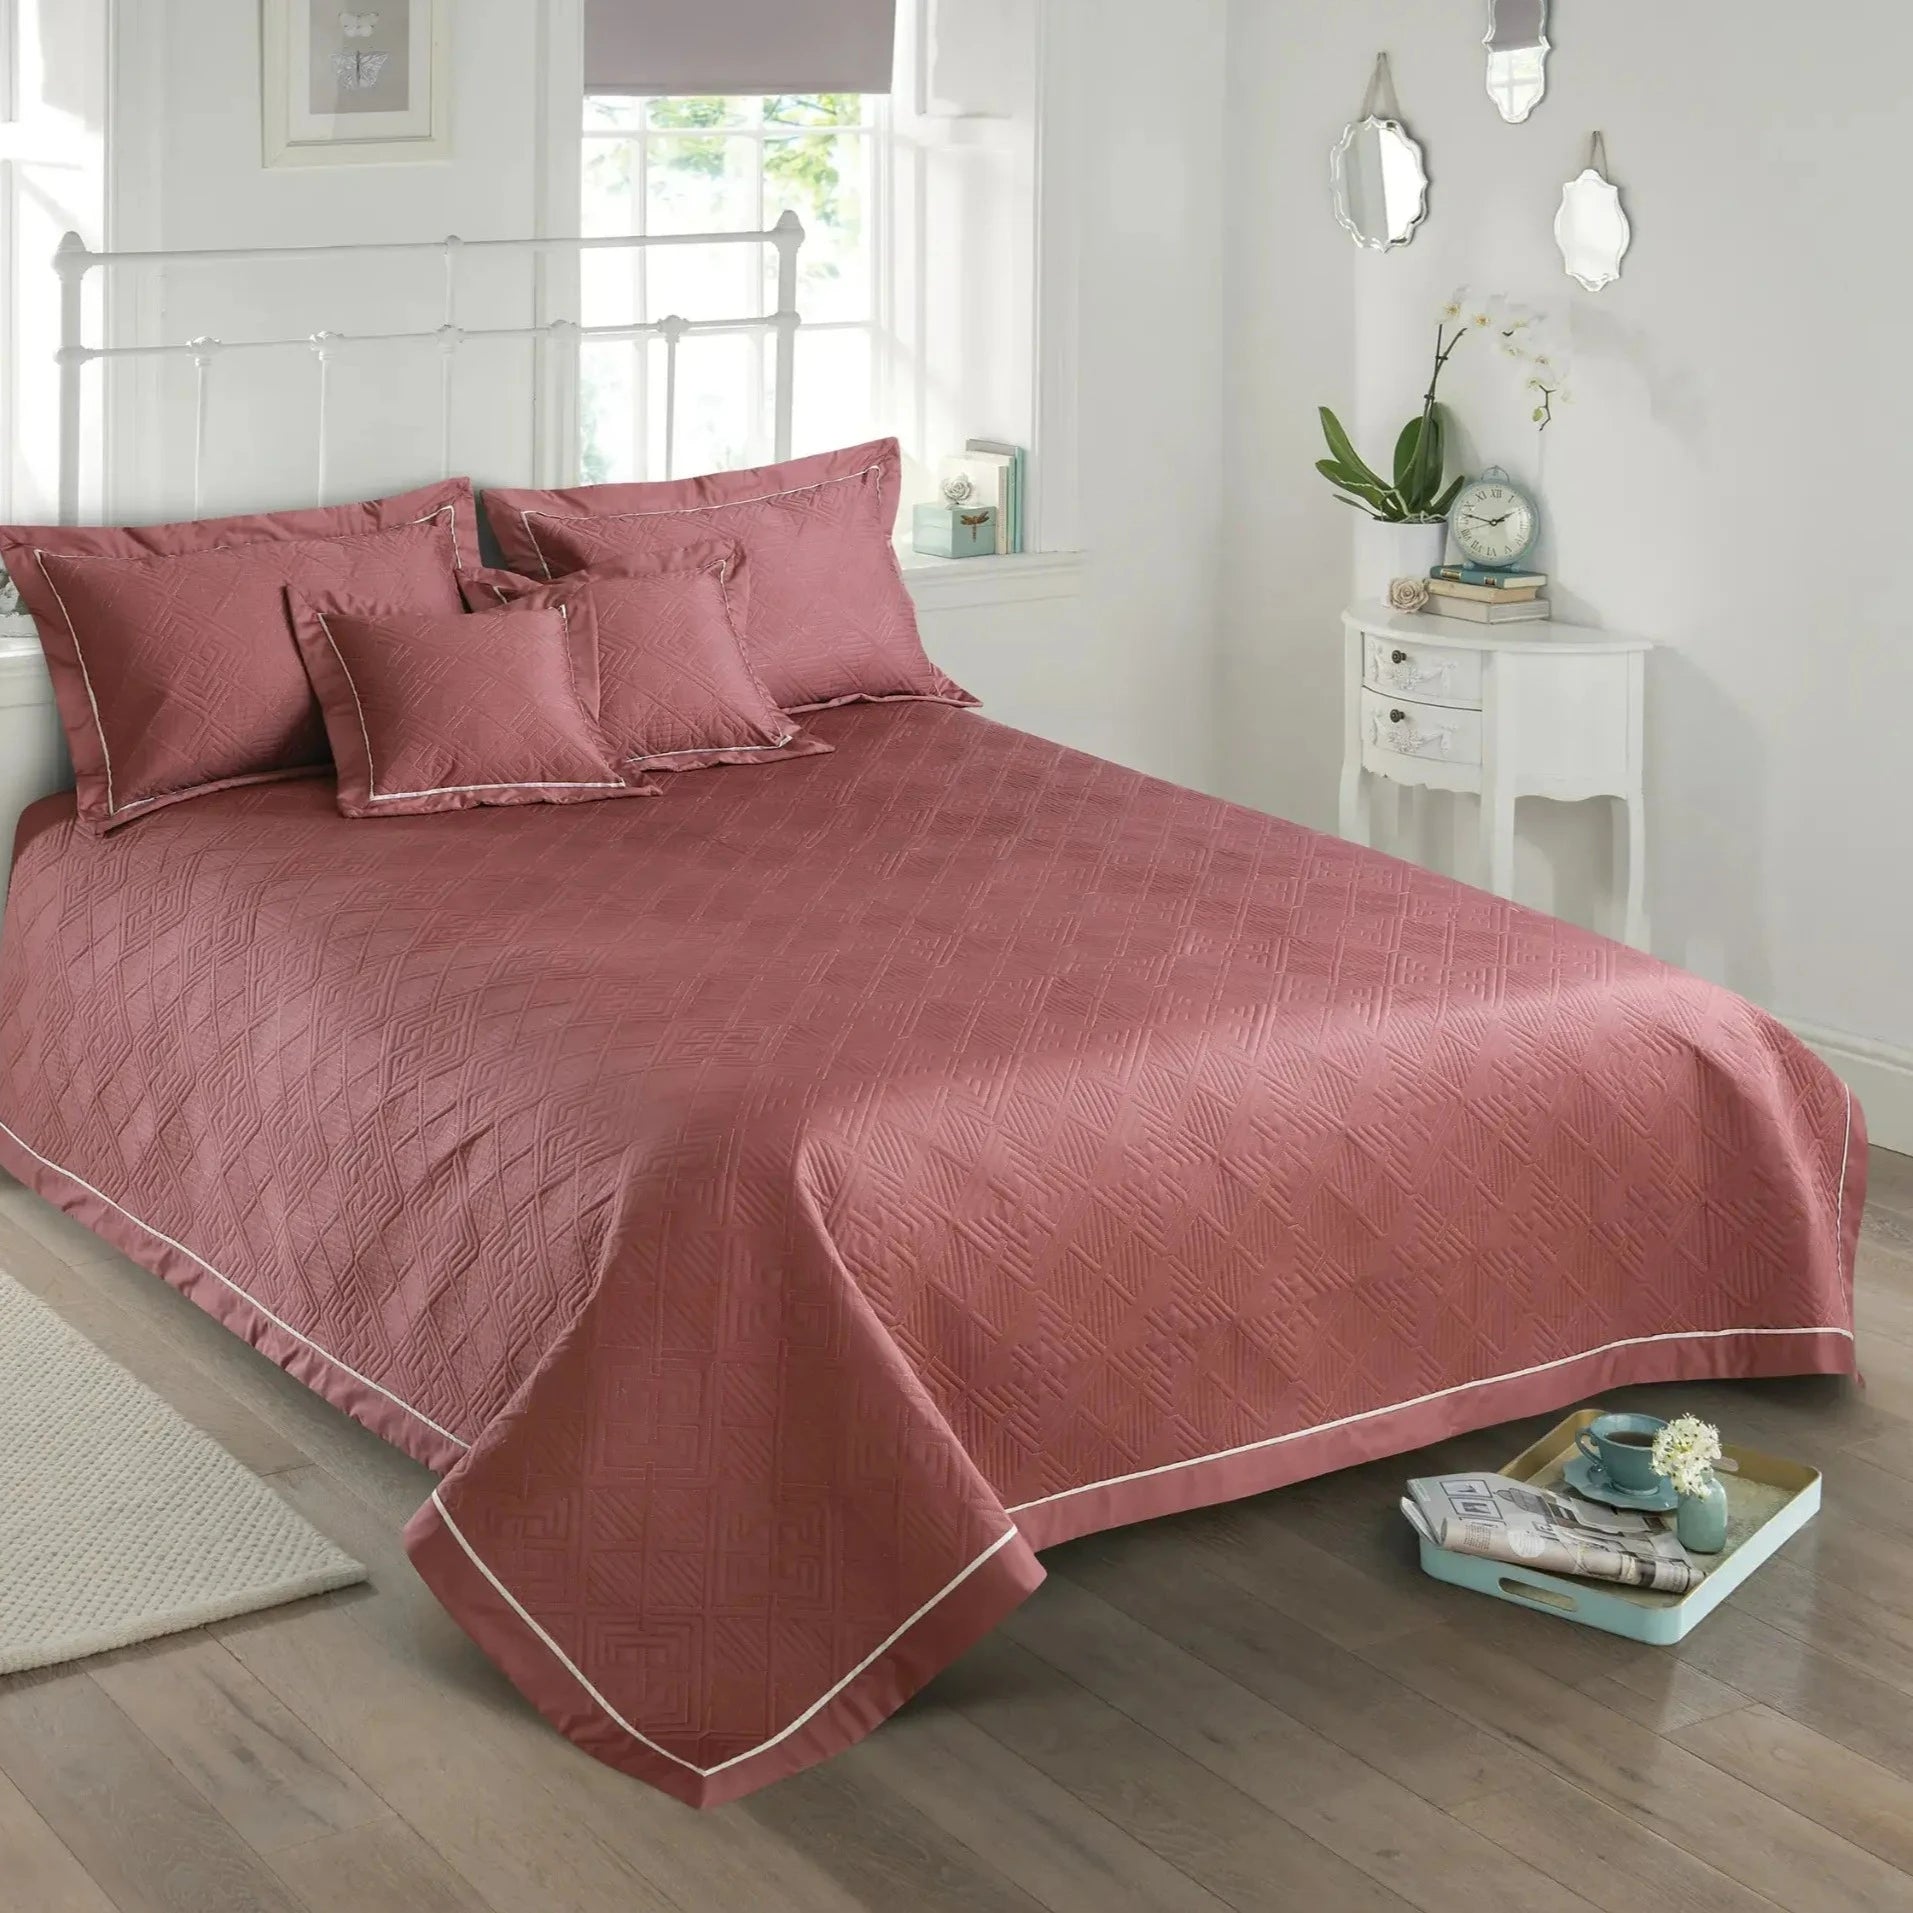 Malako Kairo 500 TC Cedar Brown Solid King Size 100% Cotton Quilted Bed Cover Set - MALAKO